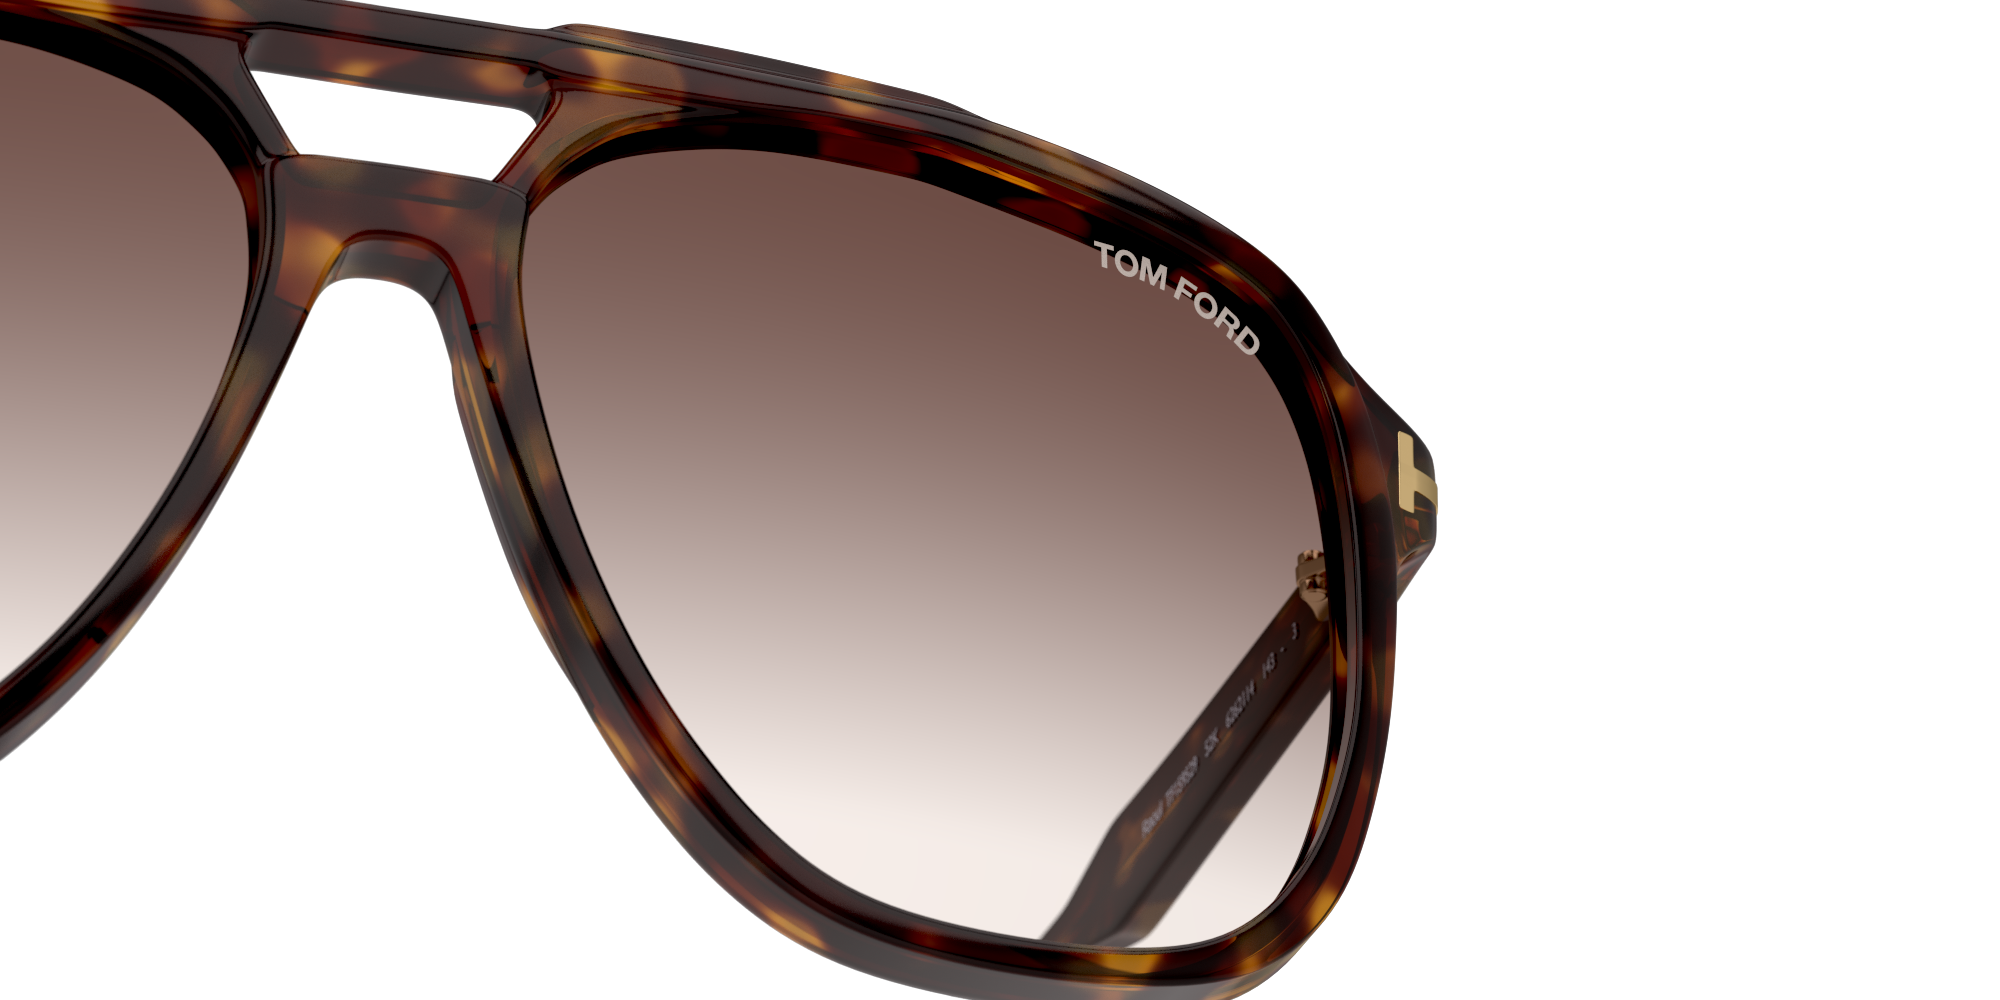 [products.image.detail01] Tom Ford TF0753 52K